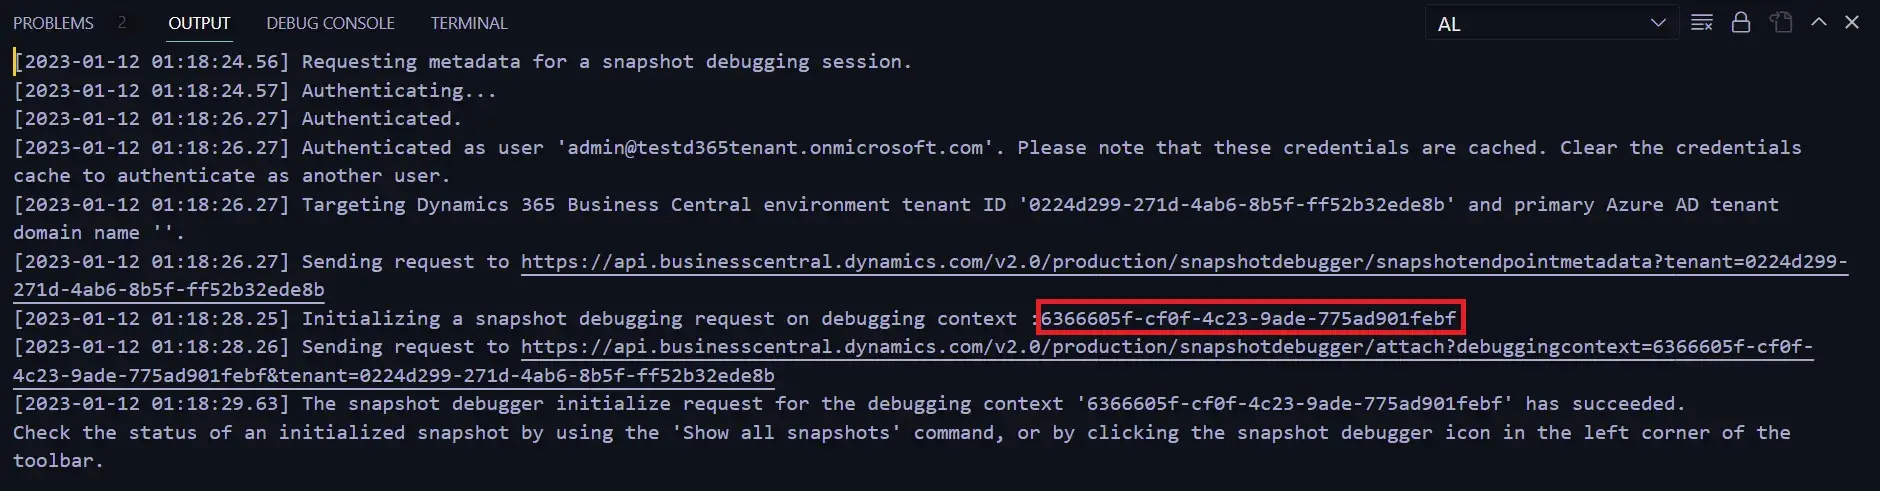 Initialize snapshot debugging with new session id Business Central - AL